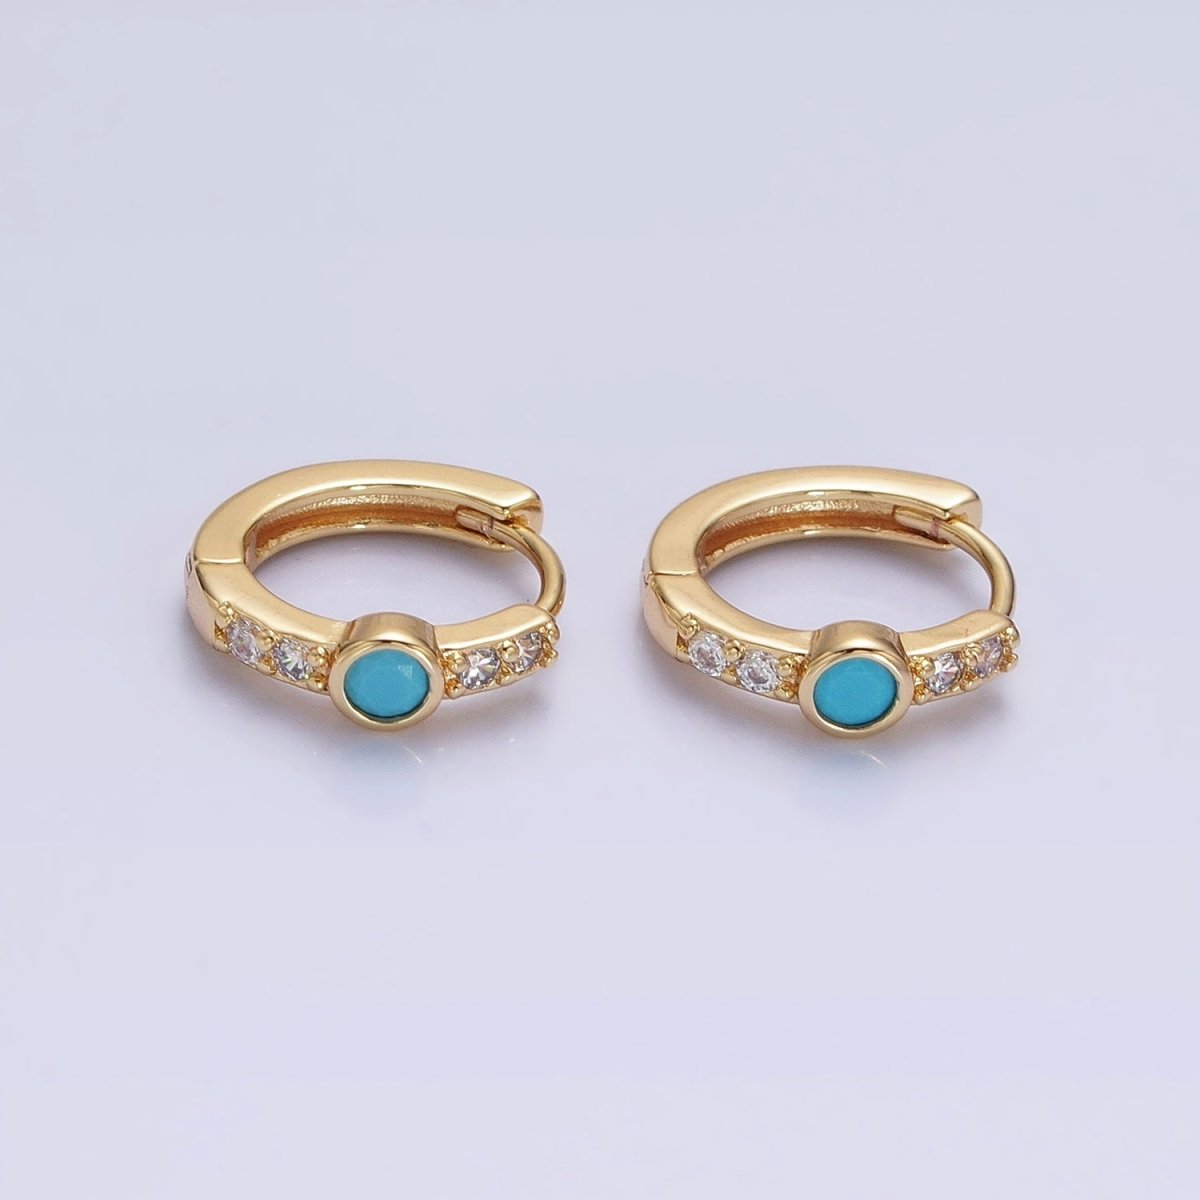 14K Gold Filled Clear, Turquoise Round Micro Paved CZ 13mm Cartilage Huggie Earrings in Gold & Silver | AB904 AB907 AB648 AE774 - DLUXCA